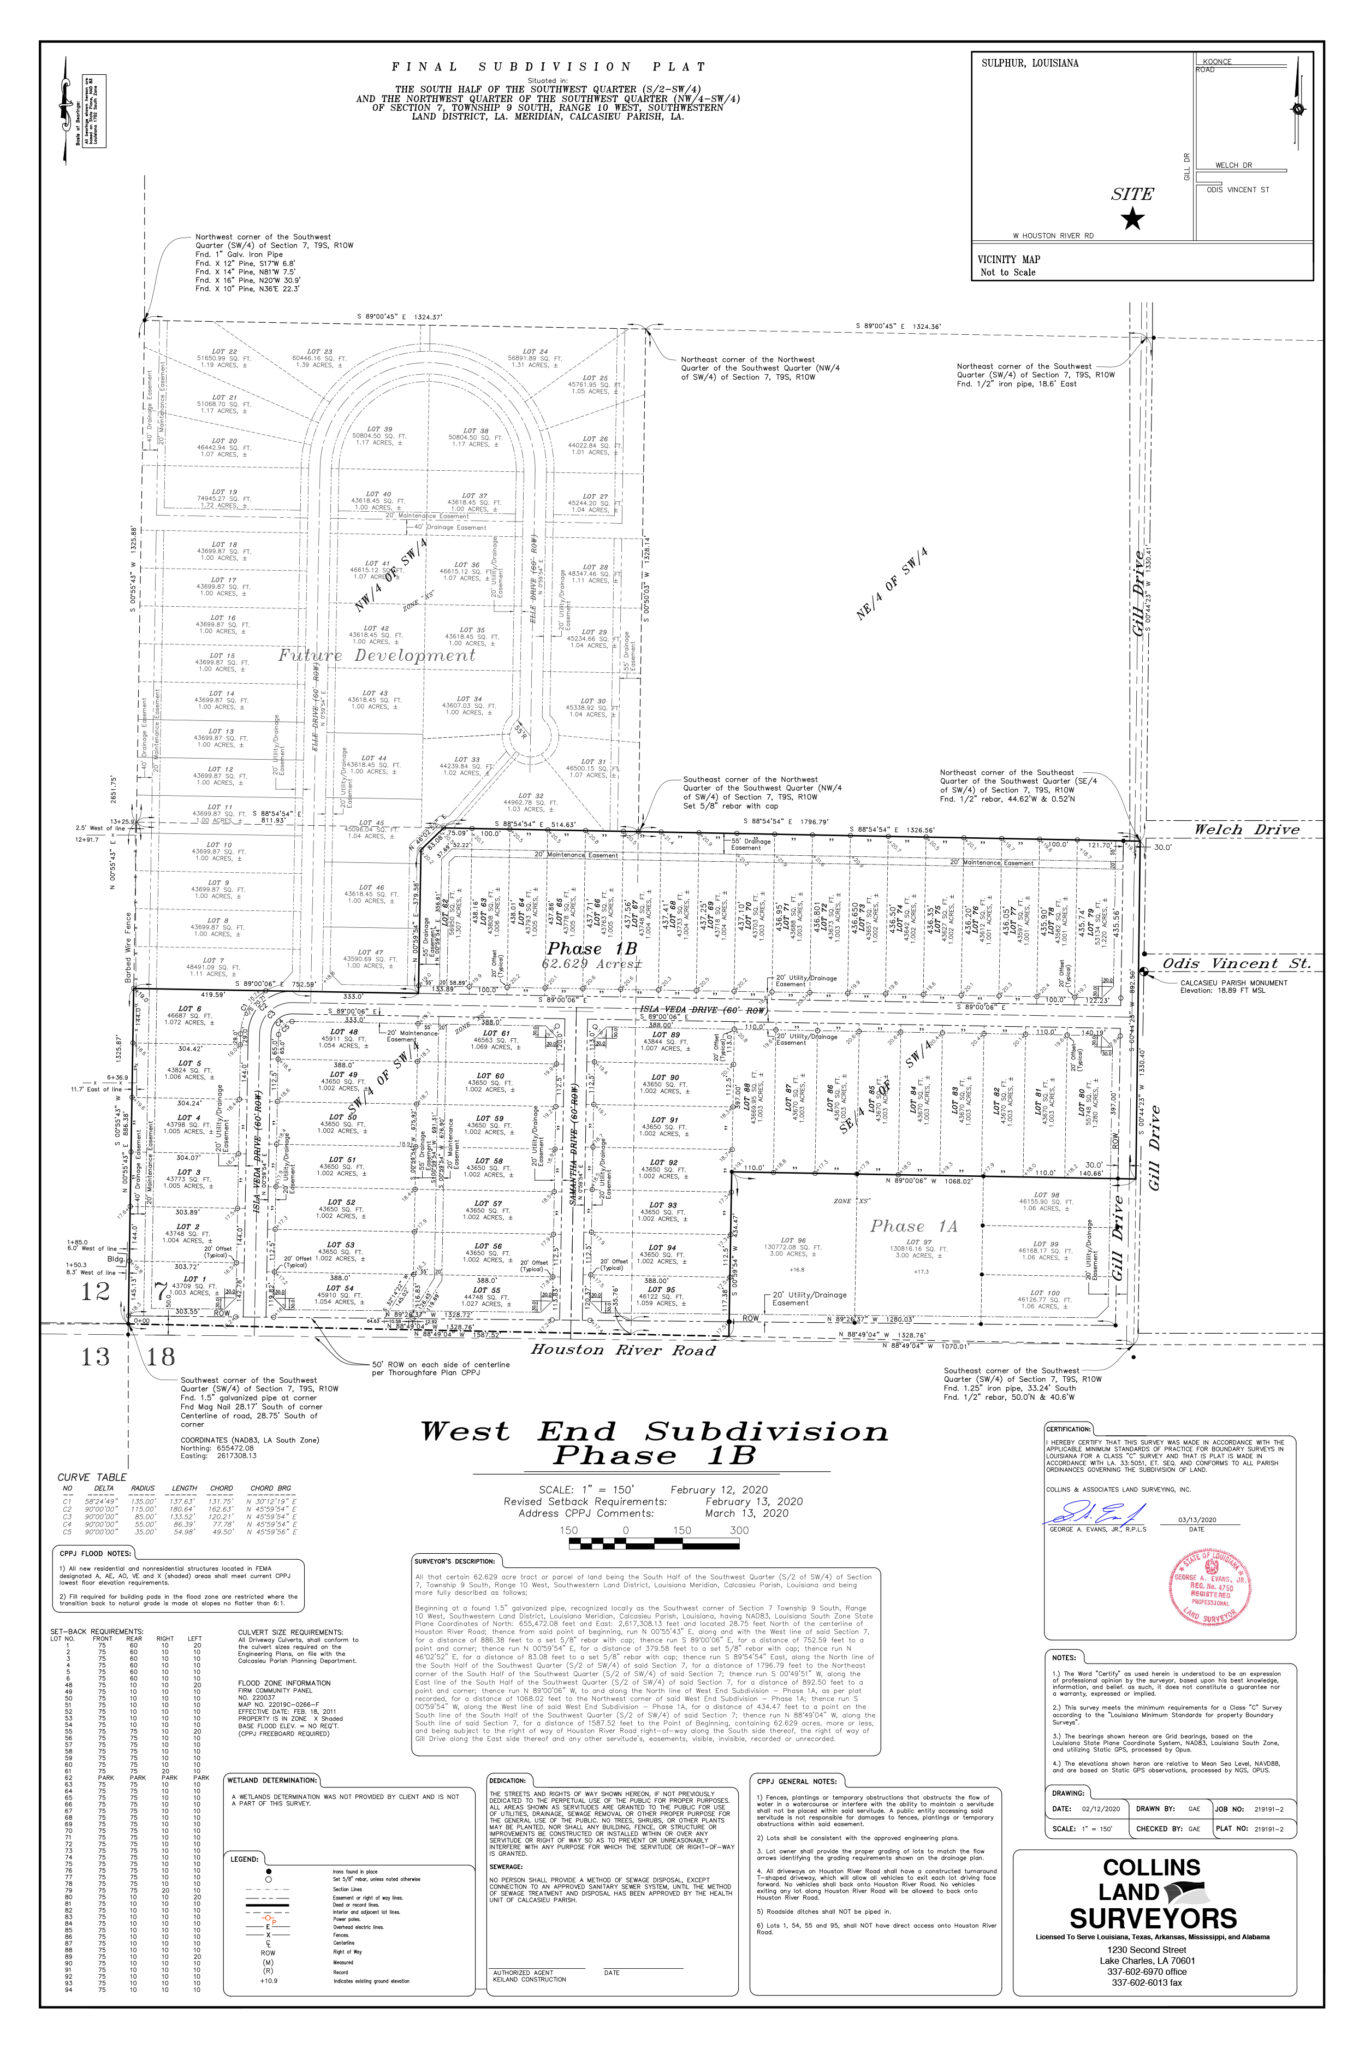 PlatLot Drawing WestEnd Subdivision